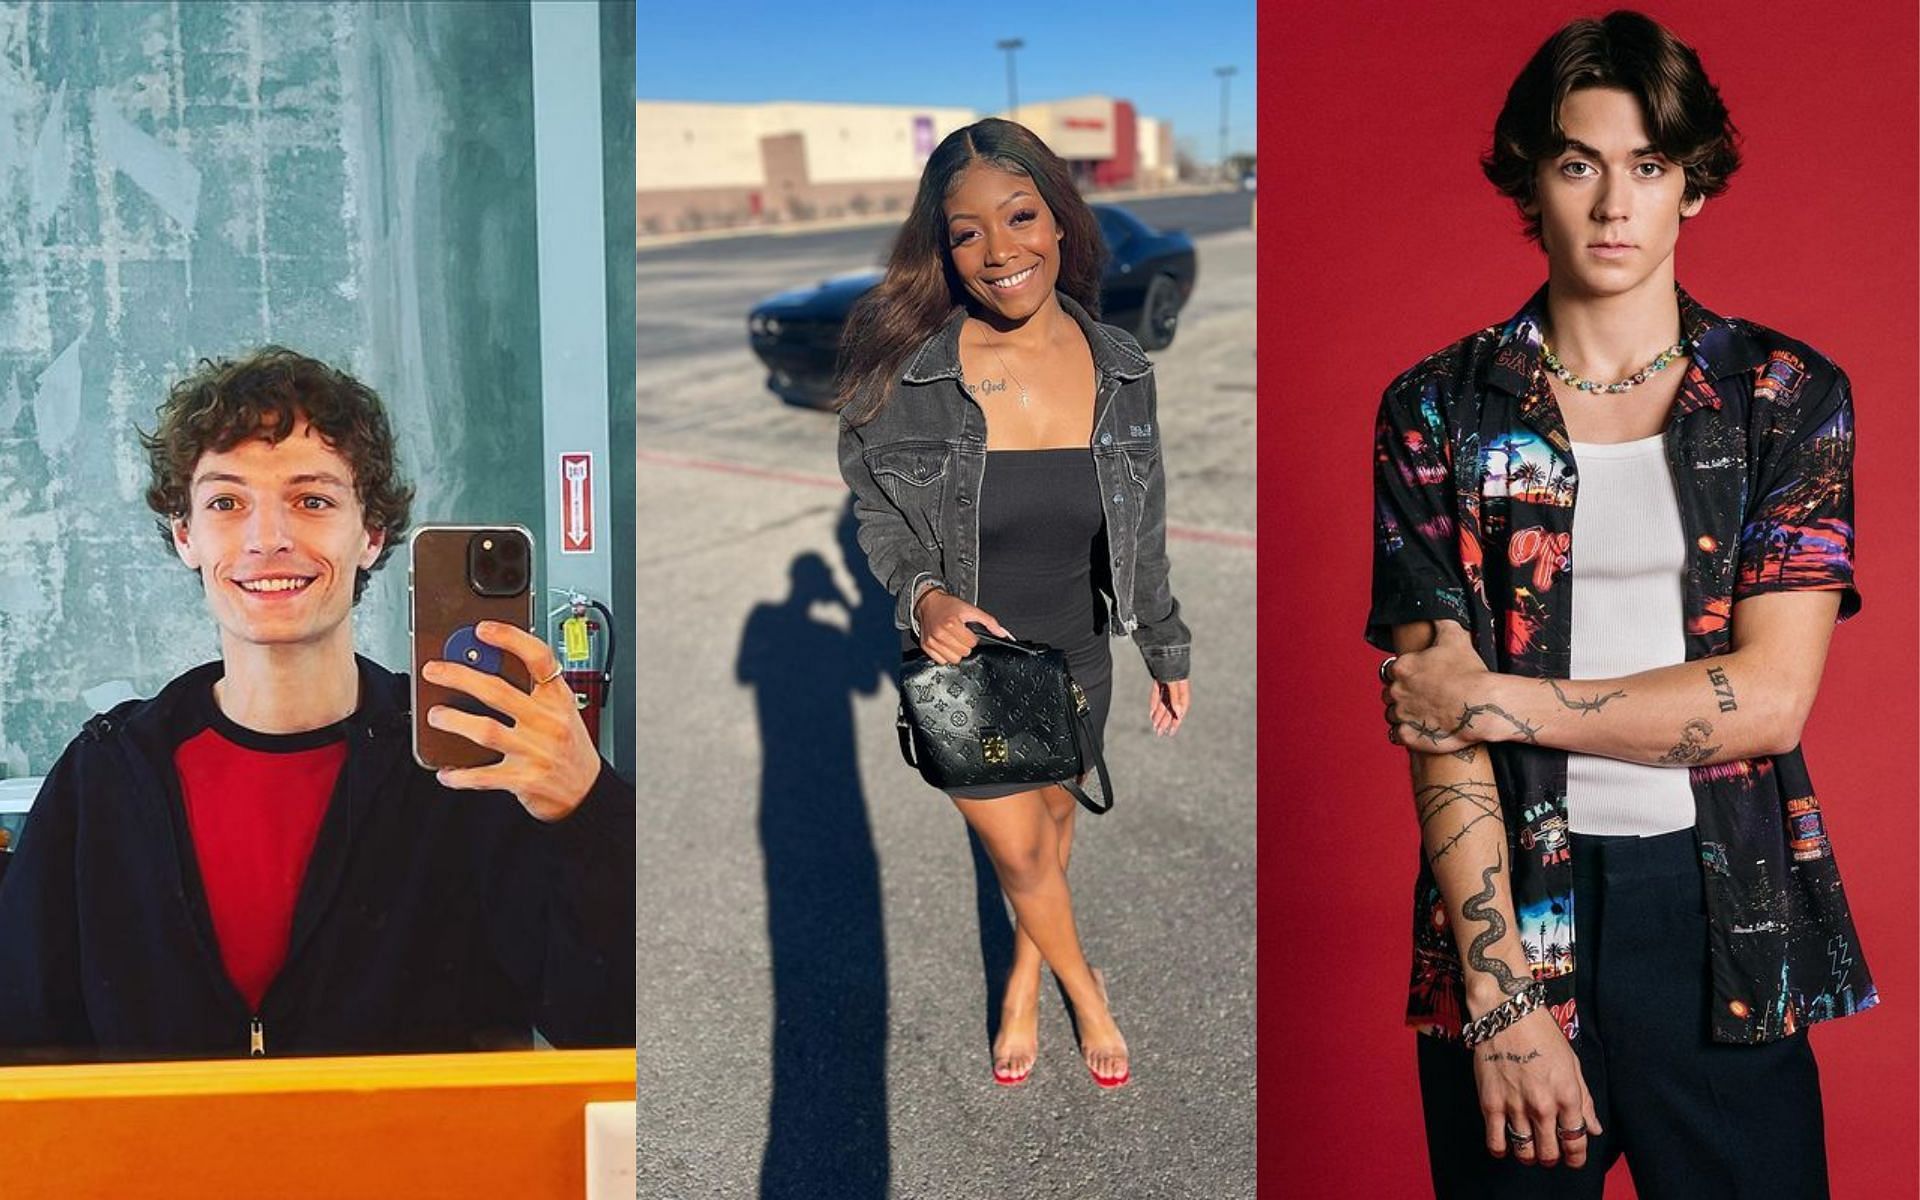 Cameron Campbell, Keara Wilson and Zack Lugo will compete in Dancing with Myself (Images via cameronfromwalmart, queen.kekeeee and zacklugo_/Instagram)